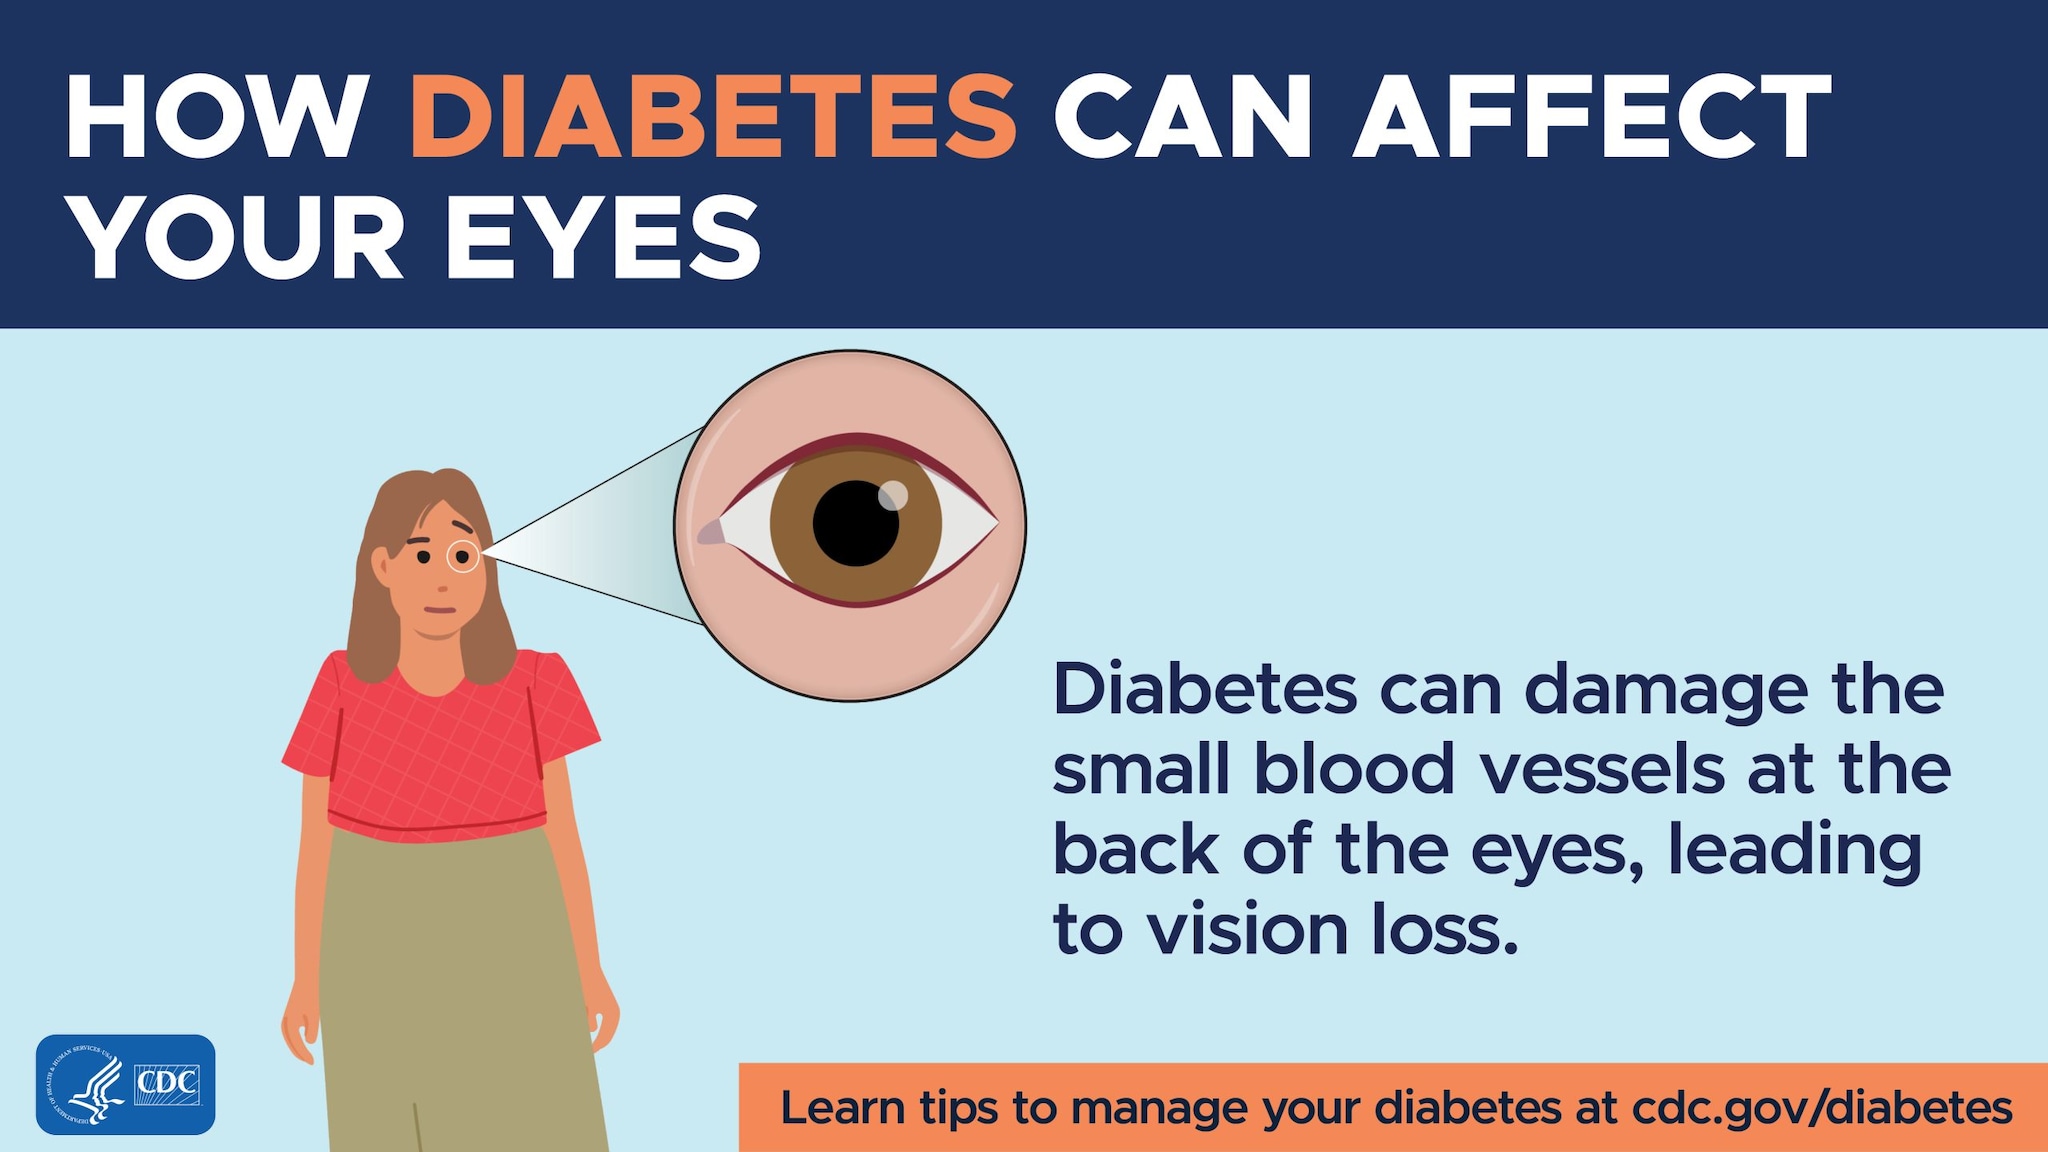 Diabetes can damage the small blood vessels at the back of the eyes, leading to vision loss.